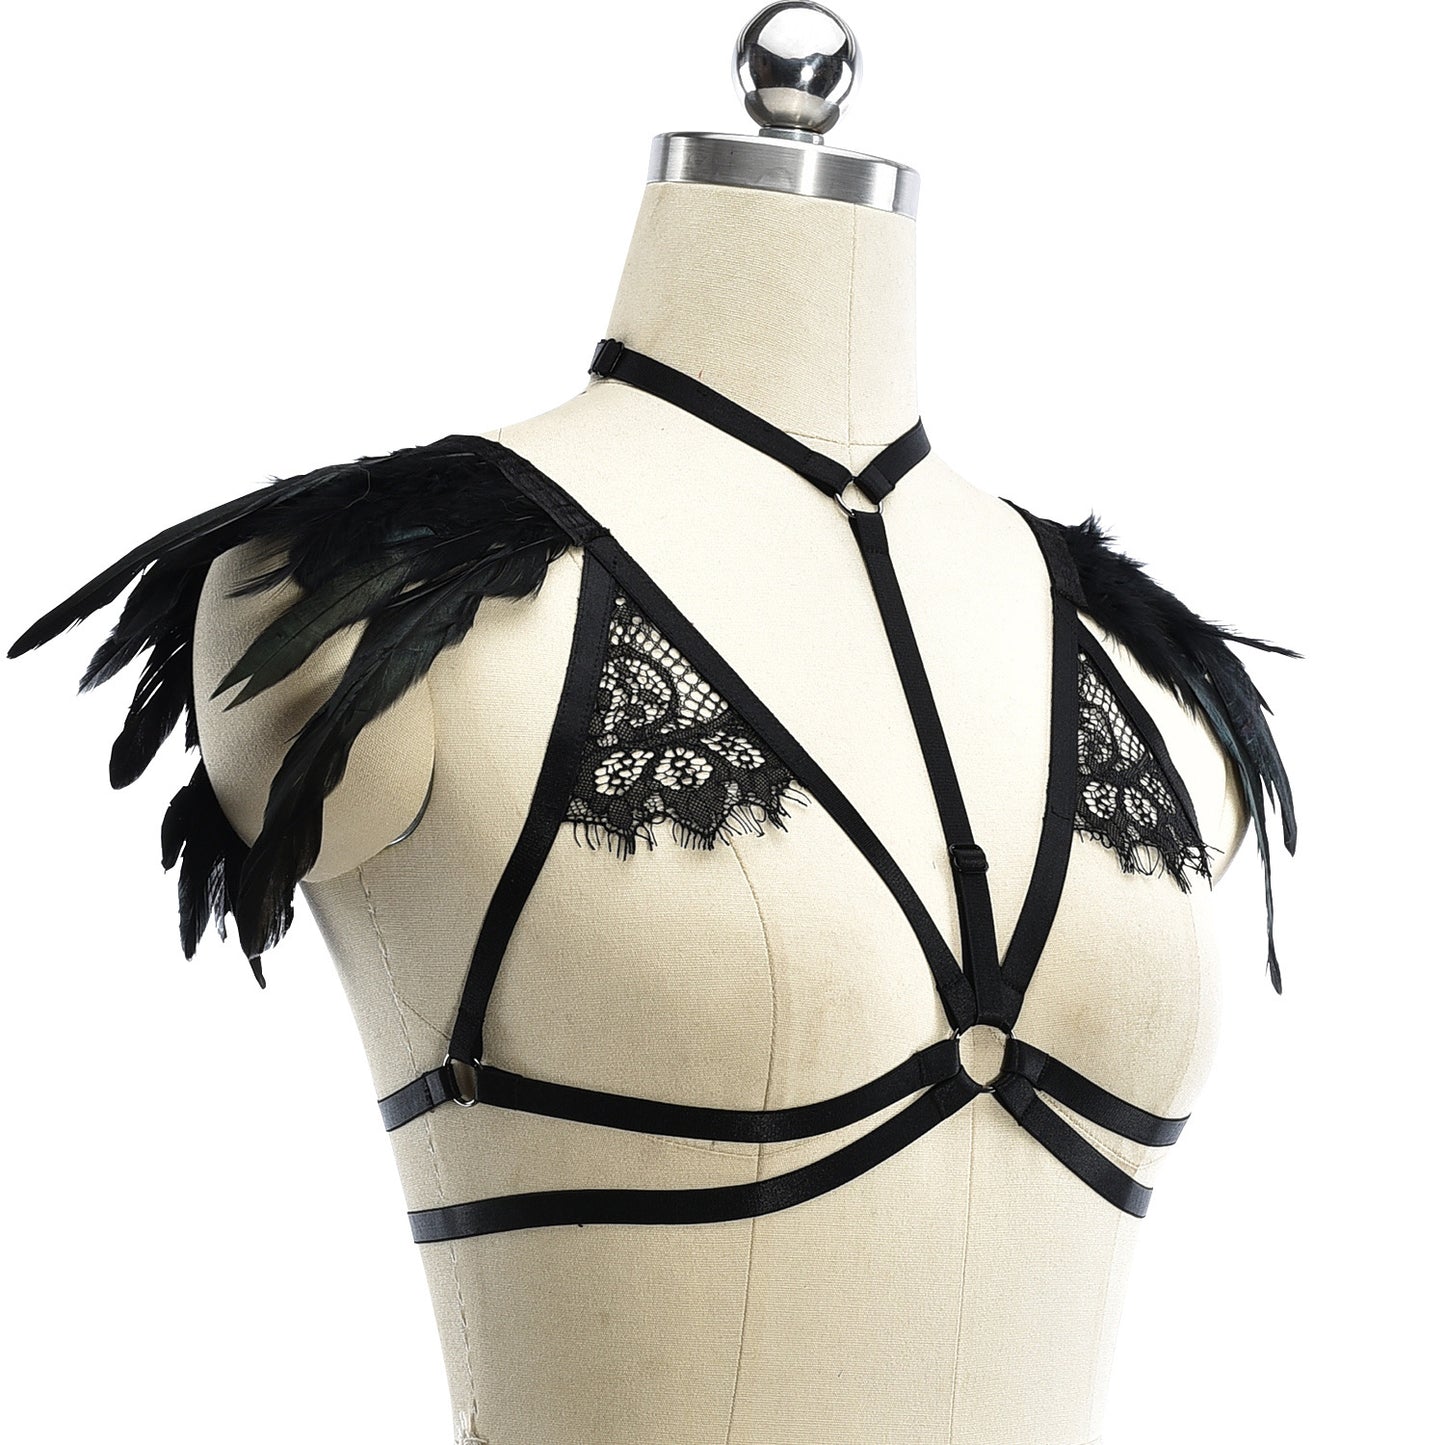 Submissive Sexy Bra Chubby Bondage Harness Lingerie Feather Bra